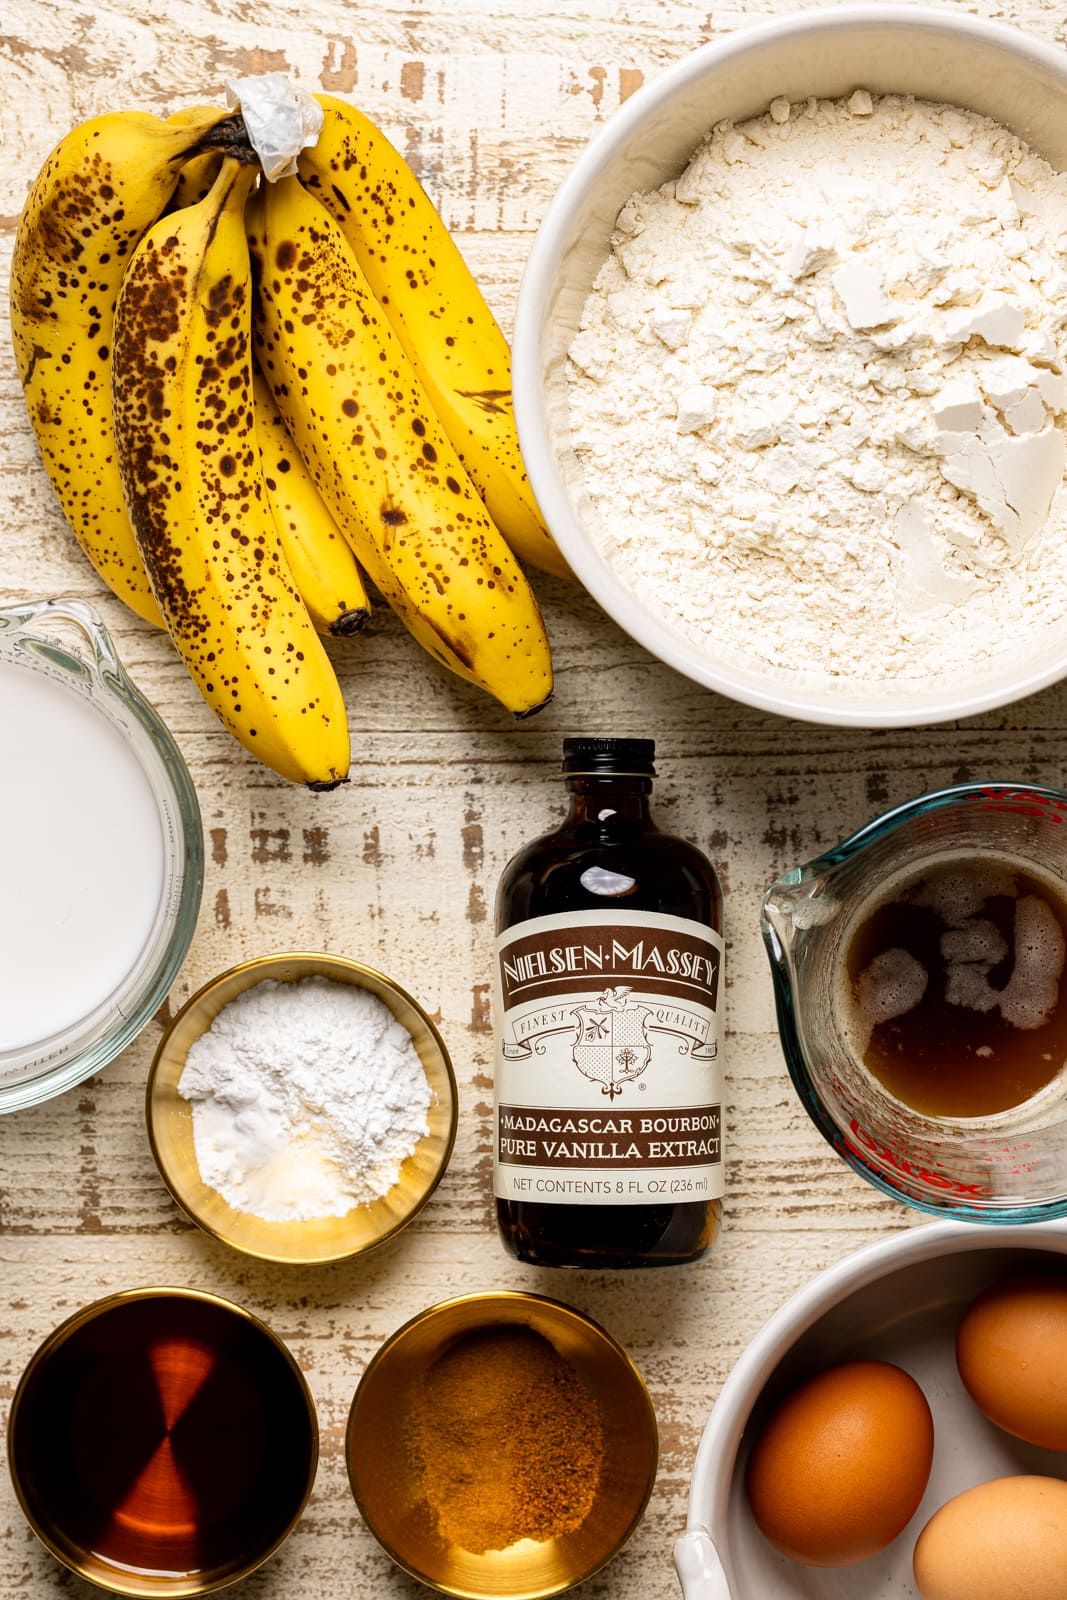 Ingredients on a white wood table including banana, flour, vanilla, eggs, milk, and maple syrup.